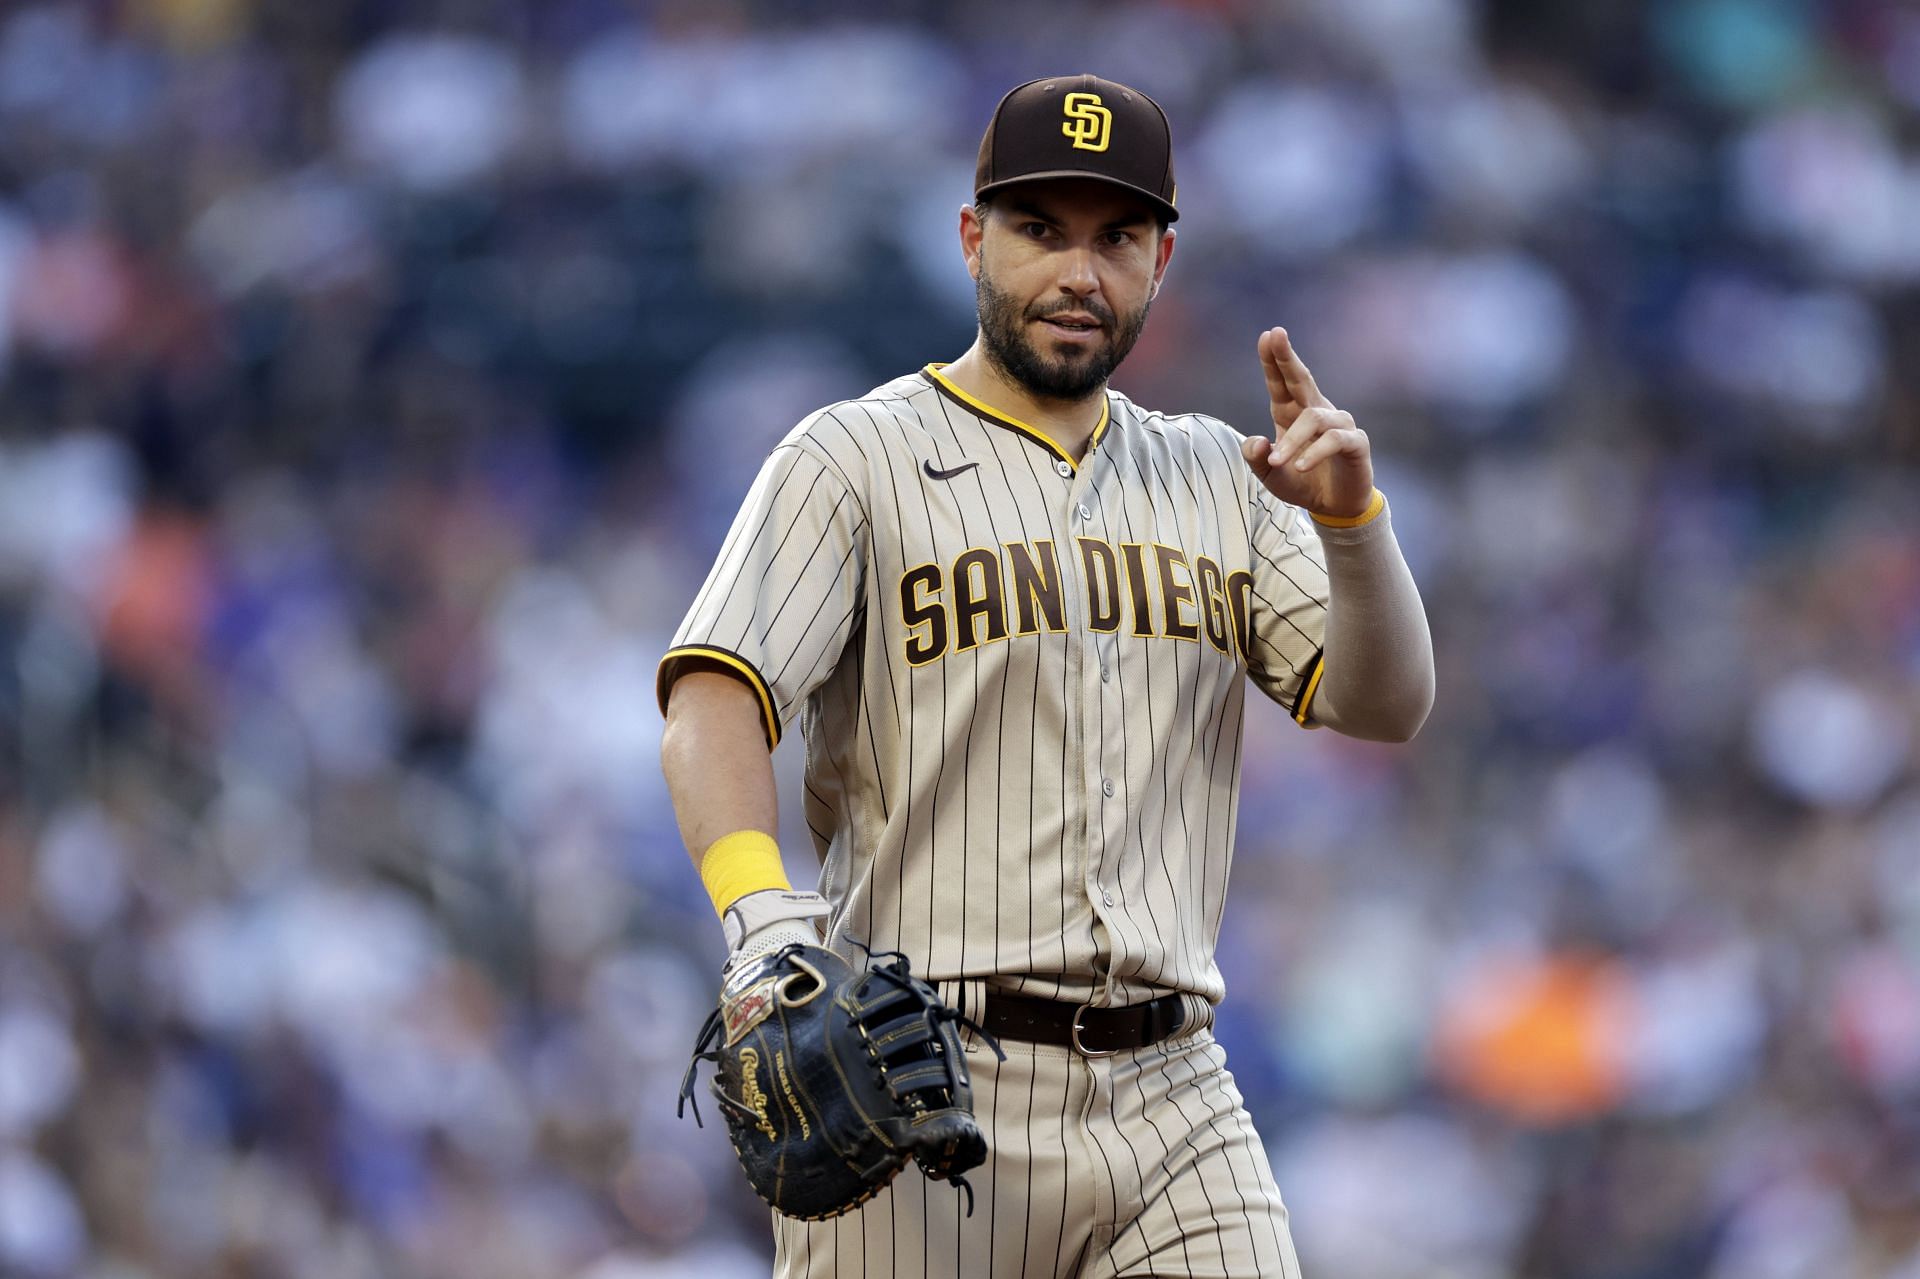 Eric Hosmer of the San Diego Padres excercised his right to waive a trade.